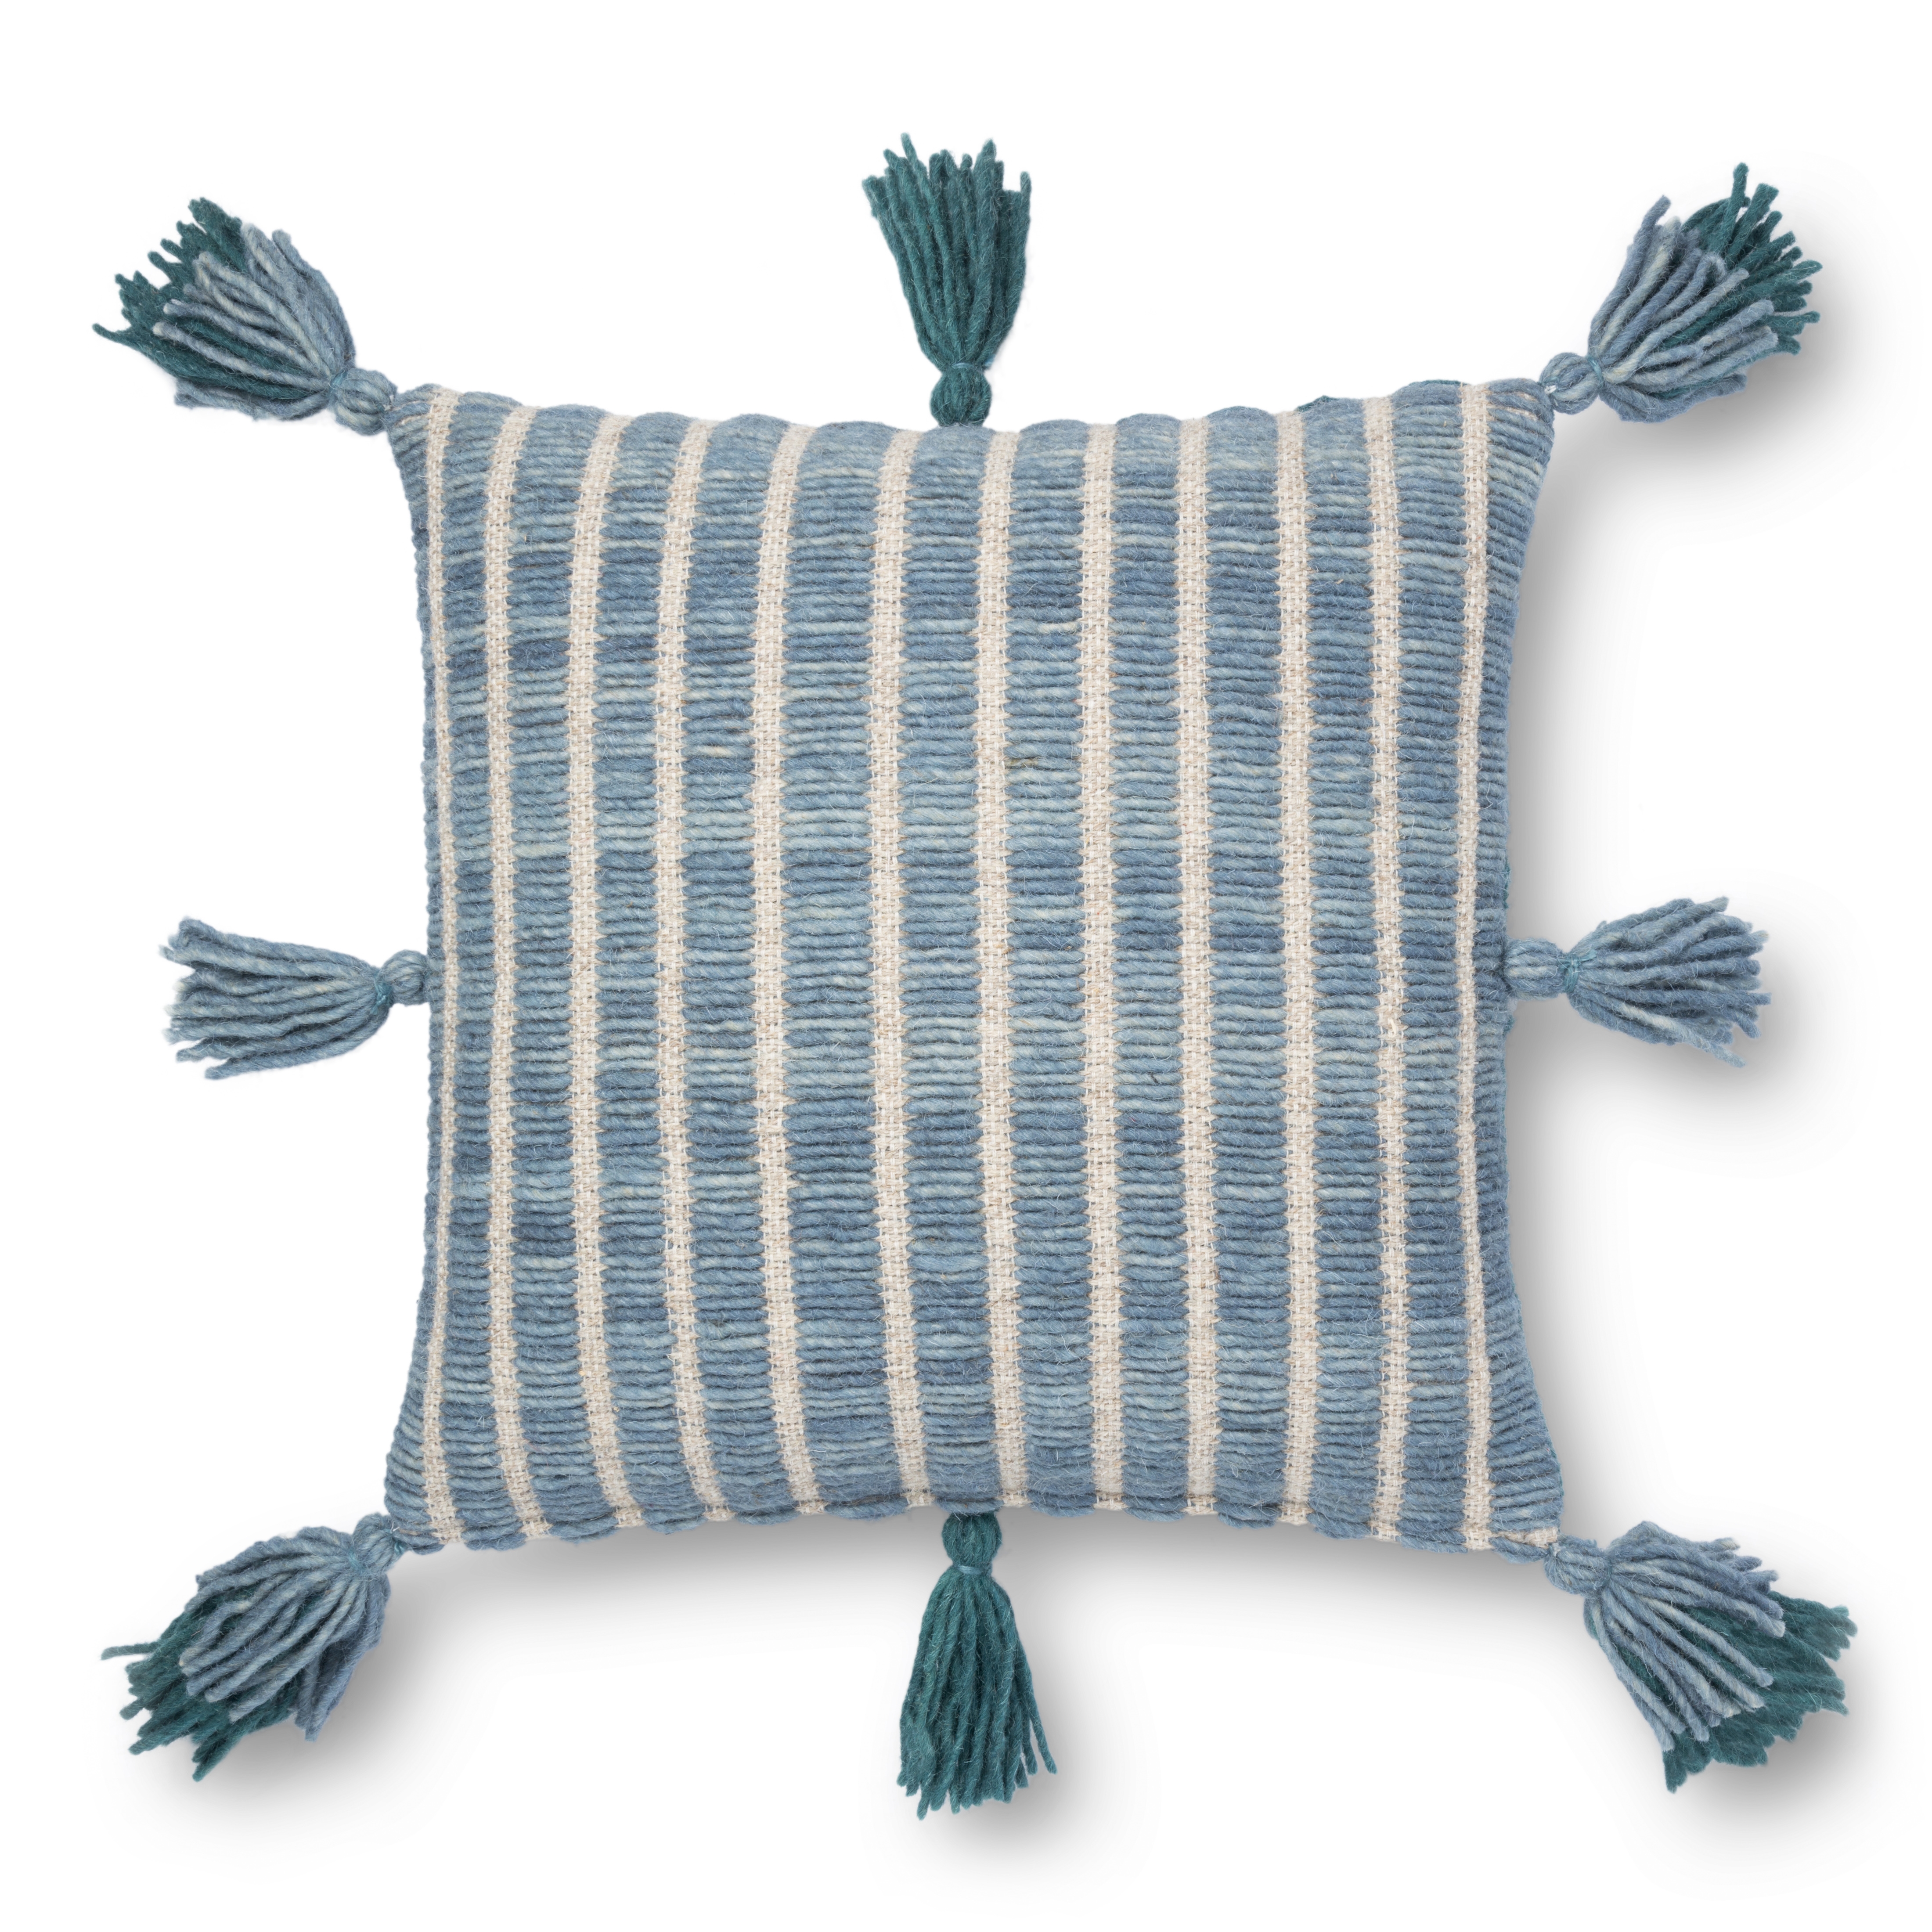 Justina Blakeney x Loloi PILLOWS P0837 Blue / Teal 18" x 18" Cover Only - Image 0